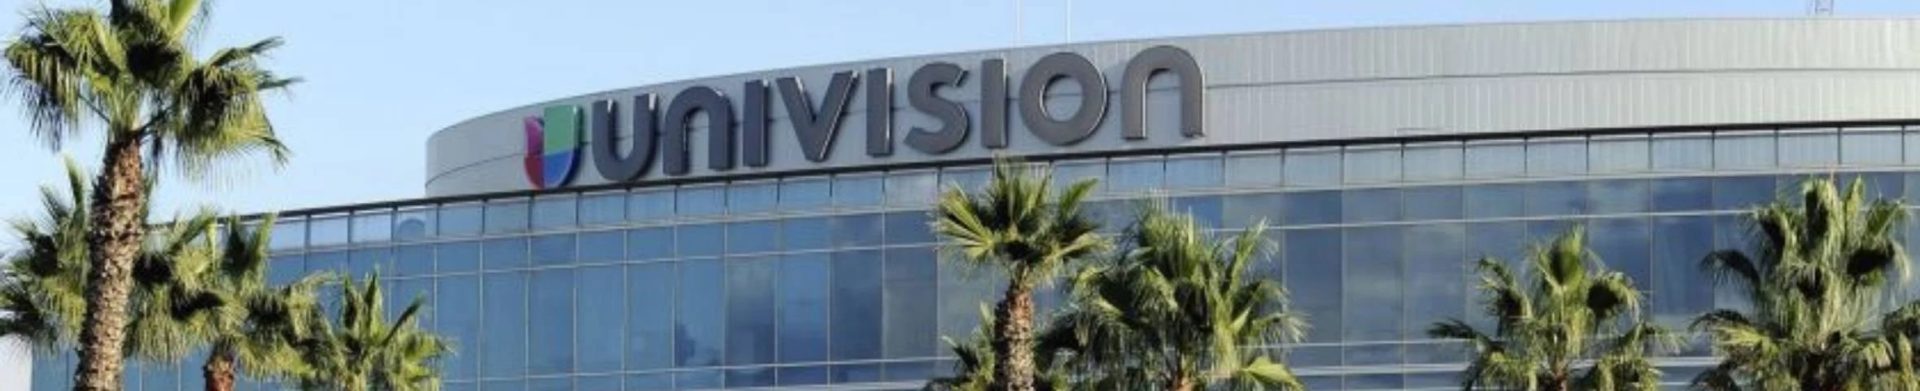 Univision office in the daytime